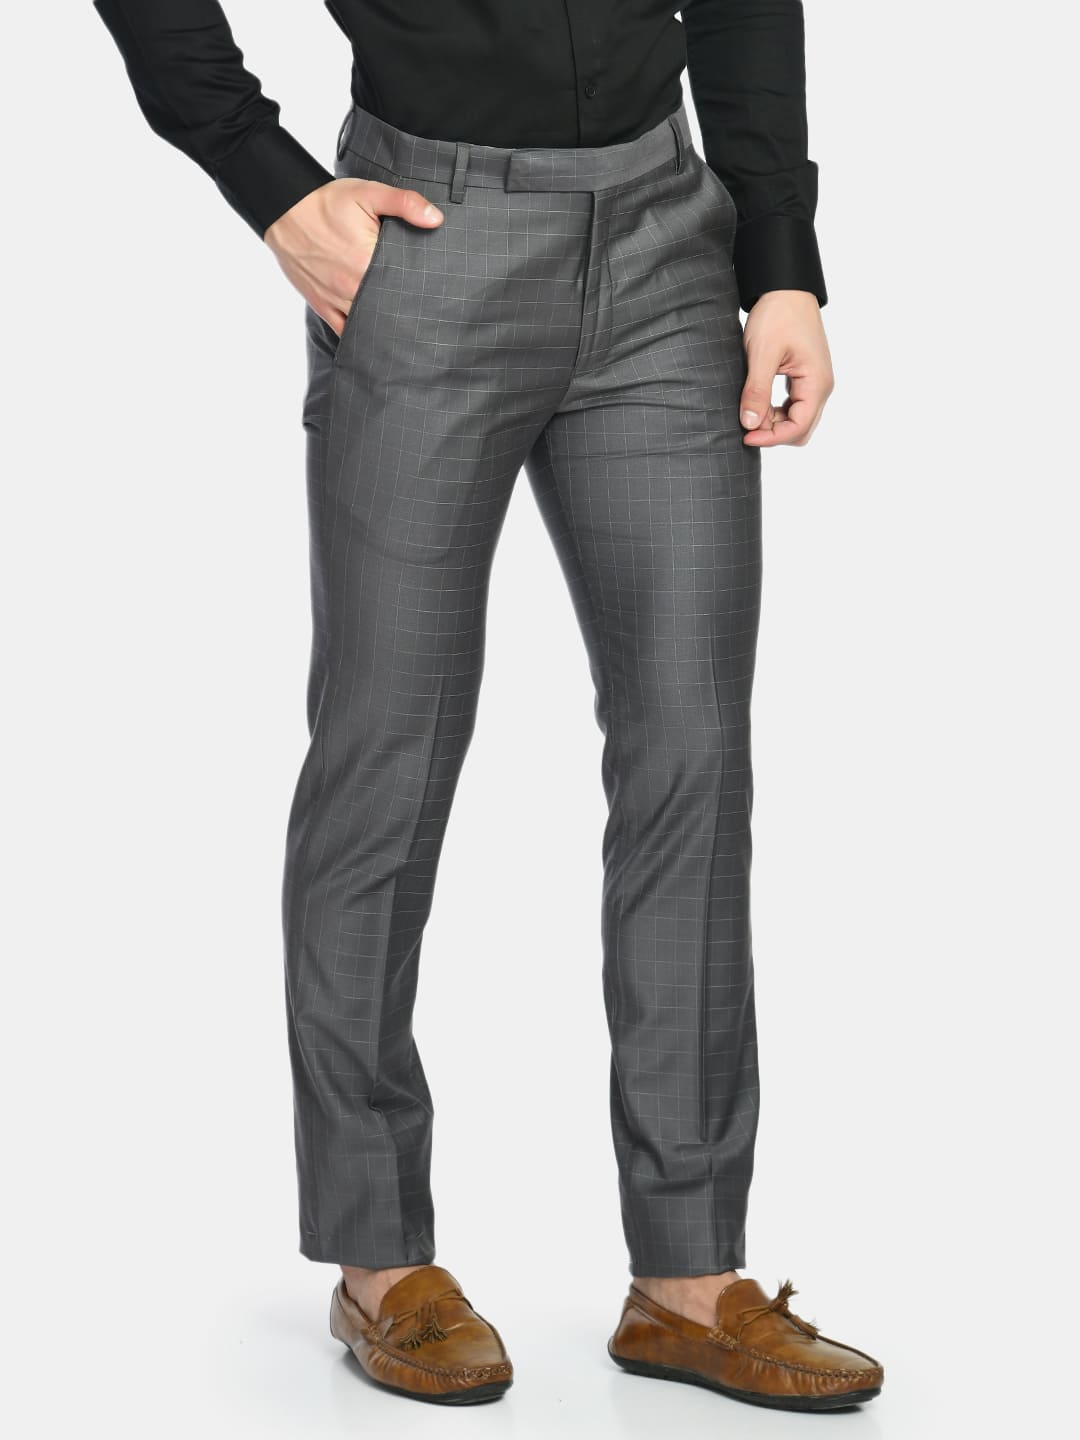 Shop Iconic Men Olive Solid Slim Fit Trouser | ICONIC INDIA – Iconic India